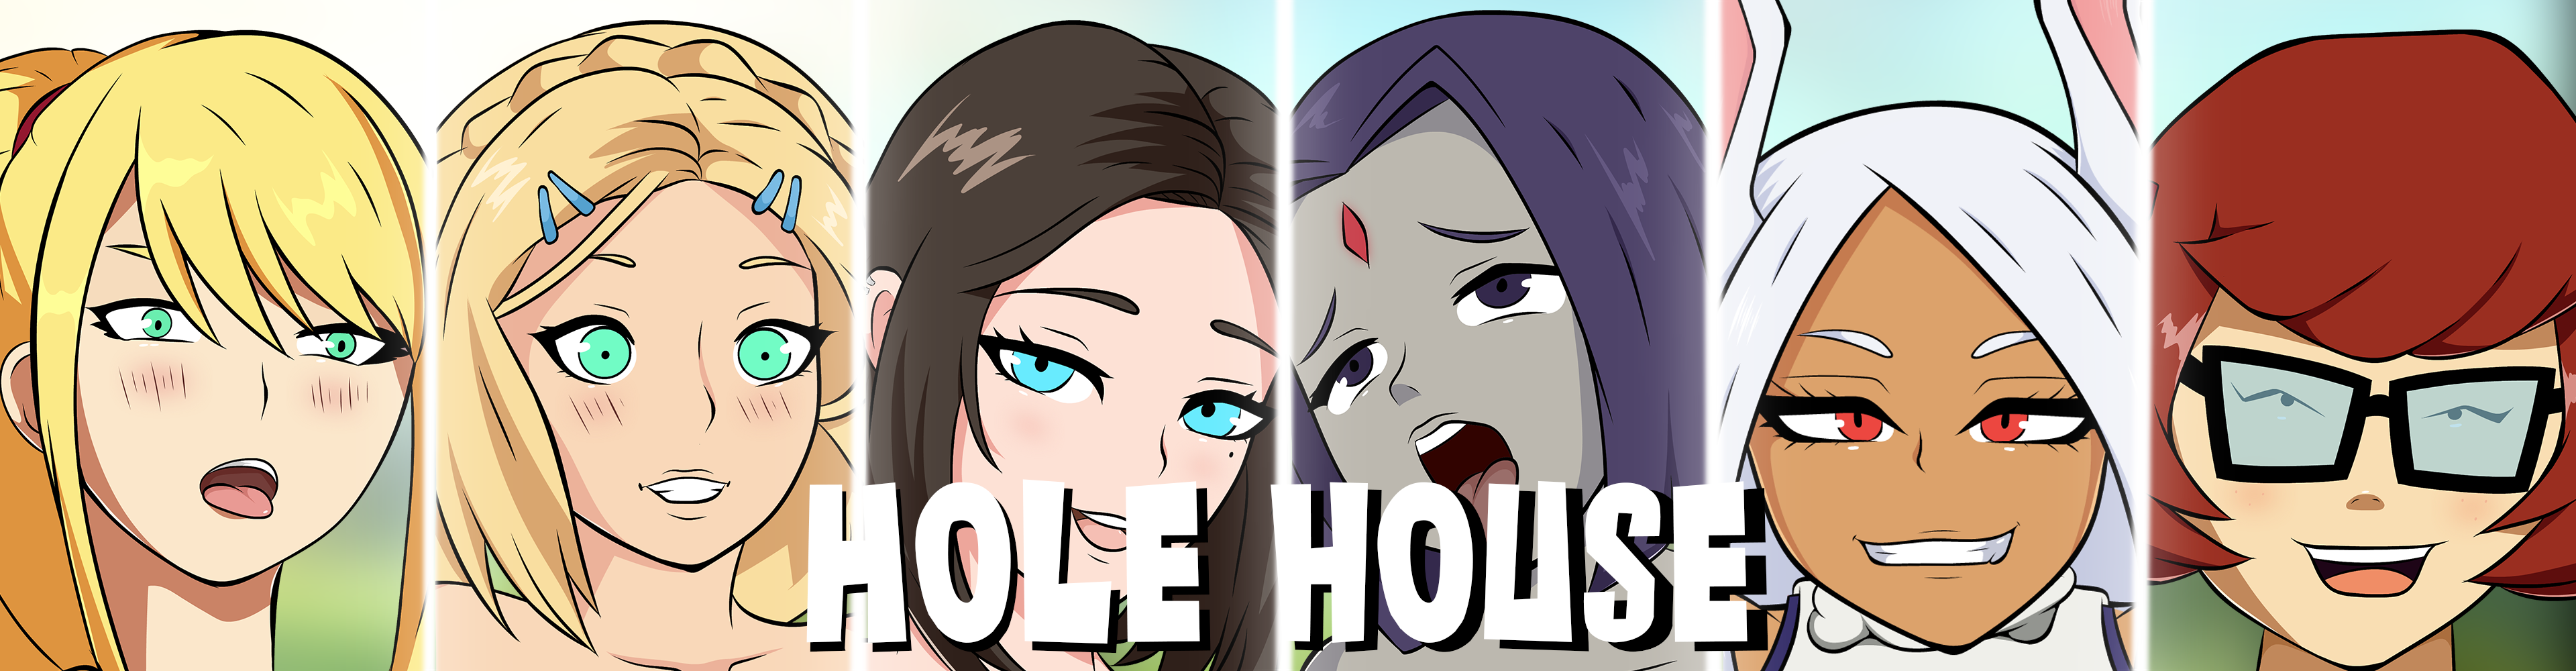 Comments 765 To 726 Of 968 Hole House By Dotartnsfw